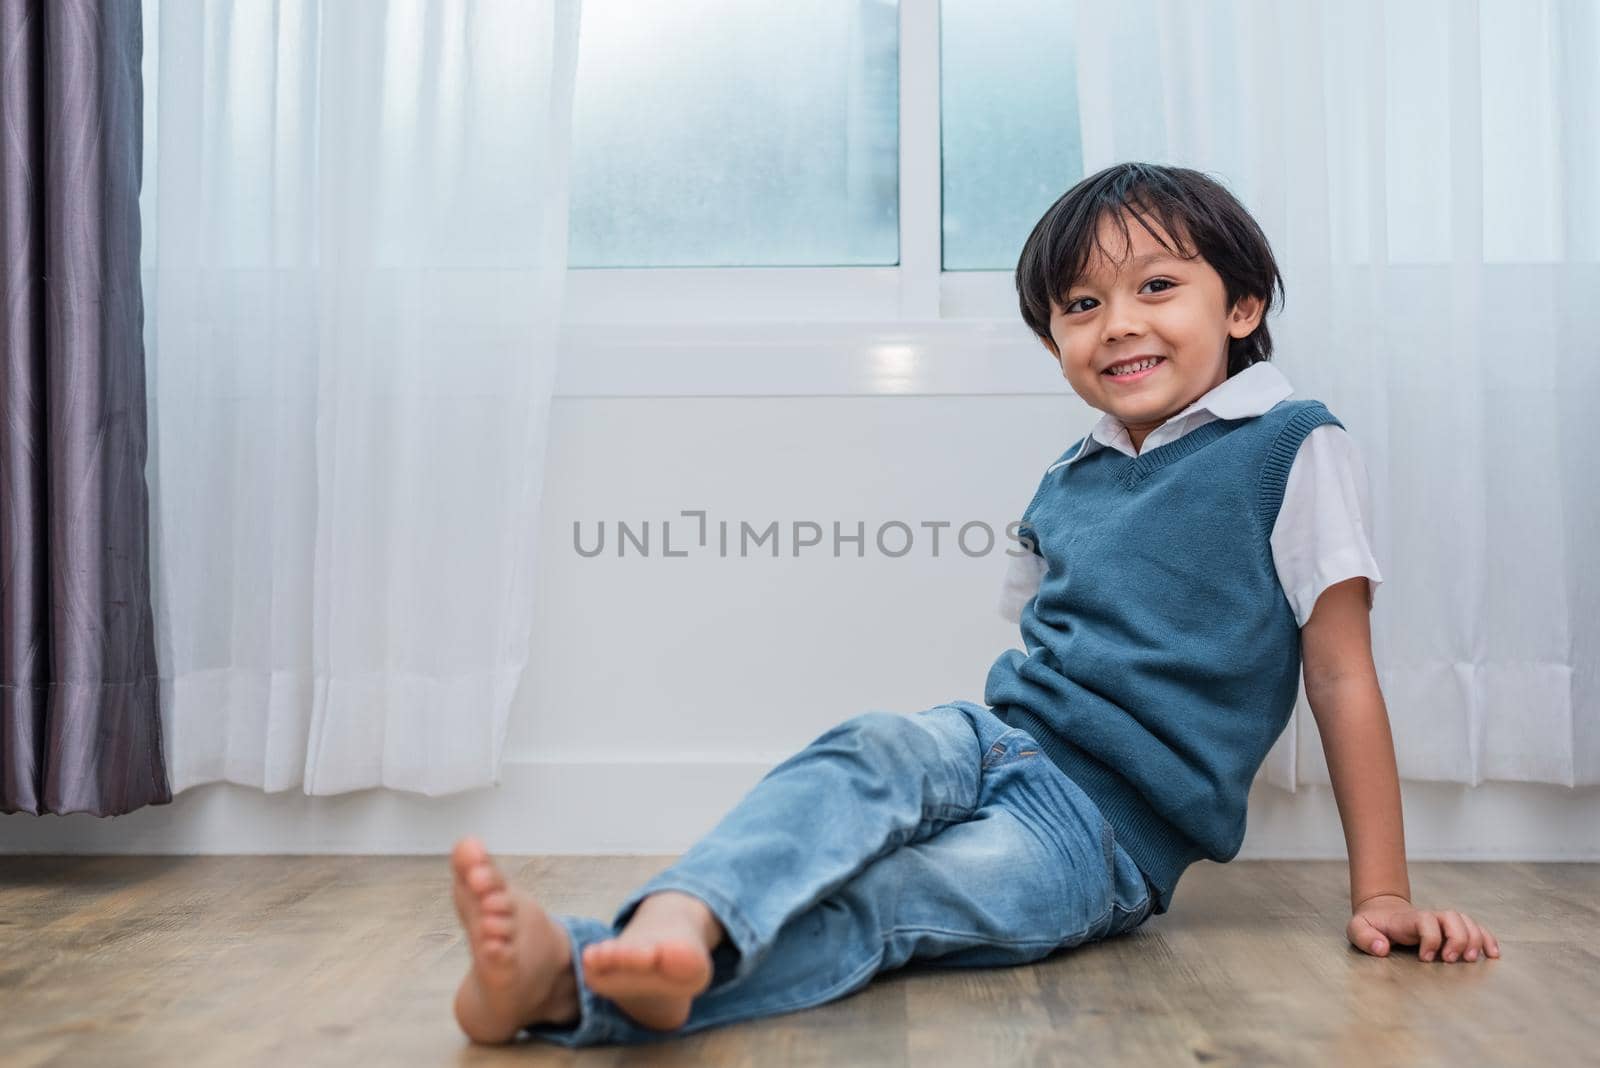 Happy boy sitting and smiling in bedroom. Lifestyles and people concept. Portrait and Happiness life concept. Home sweet home theme.